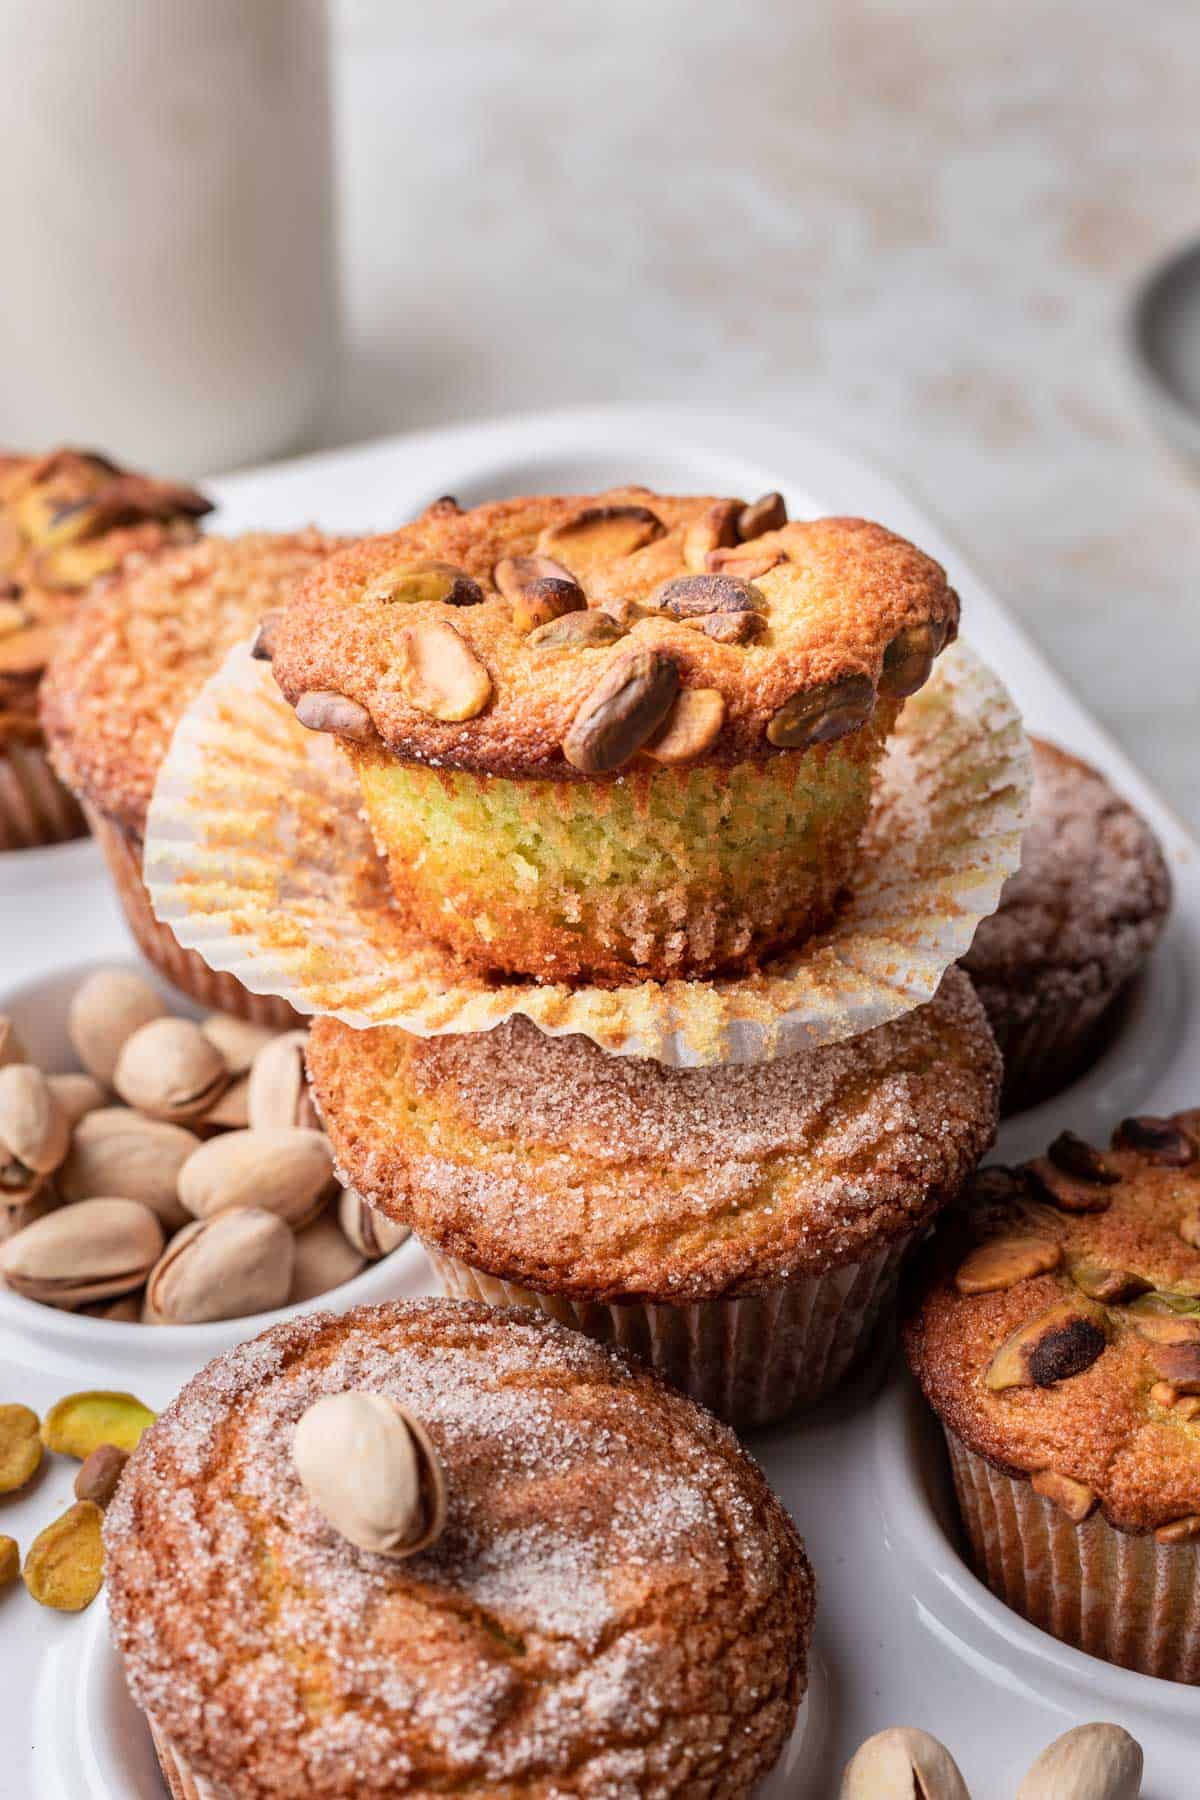 A pistachio muffin unwrapped on a tray of muffins.